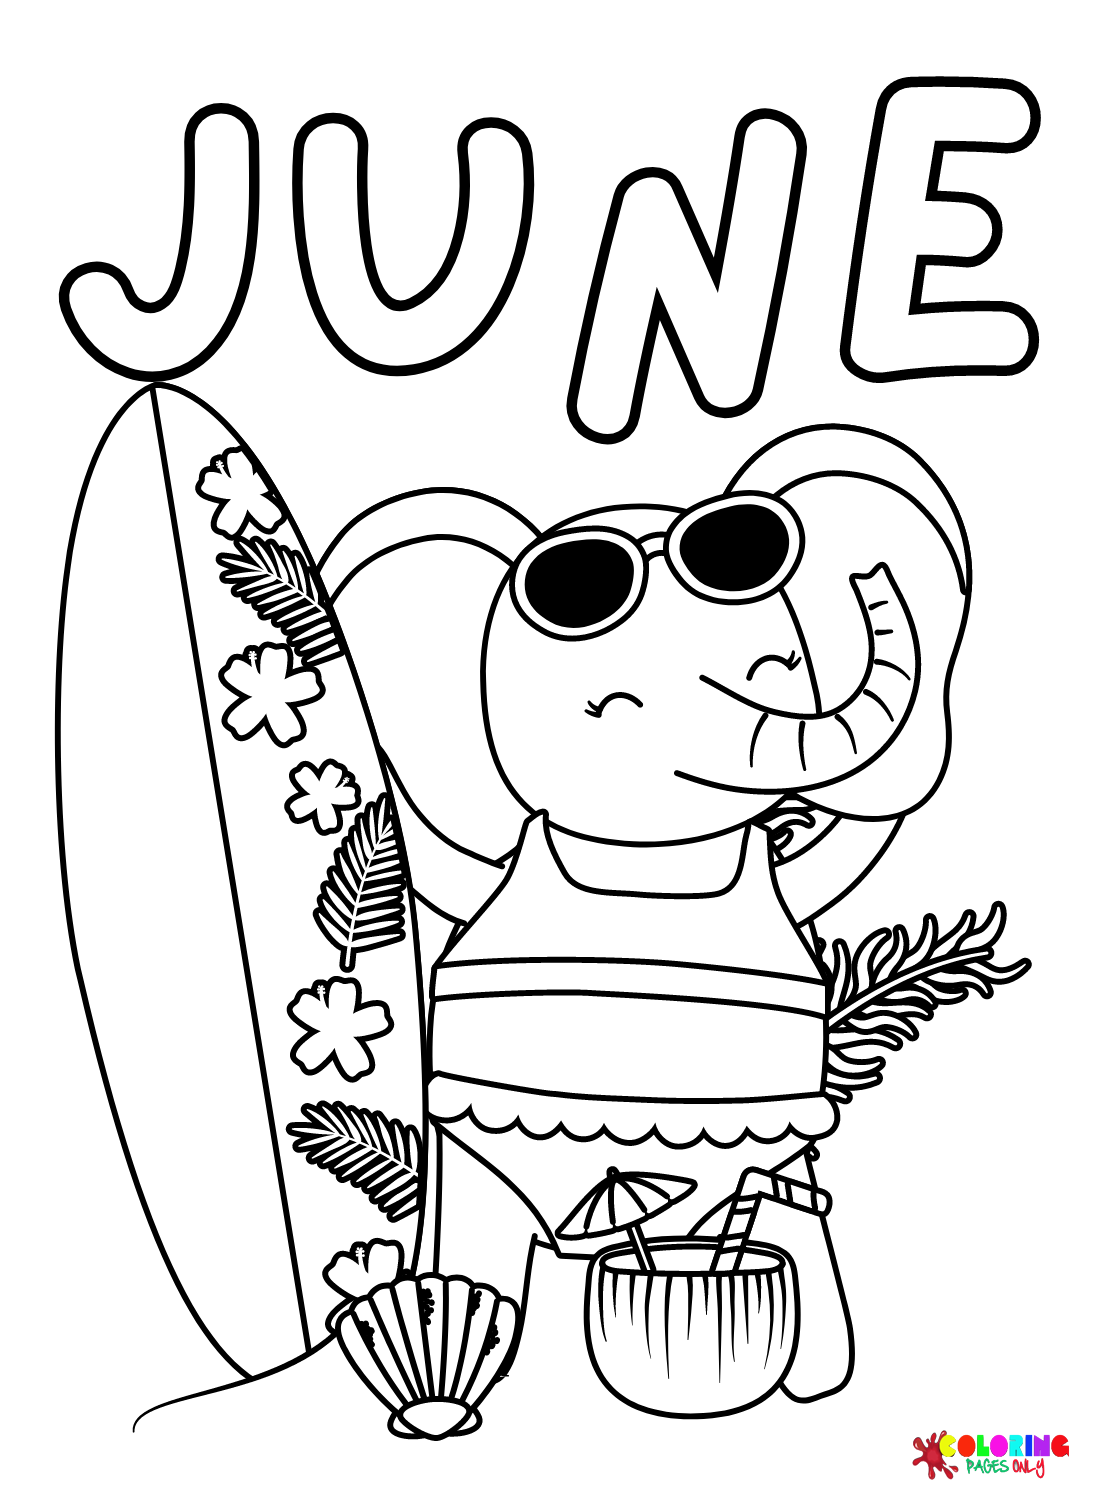 June with Elephant Coloring Page